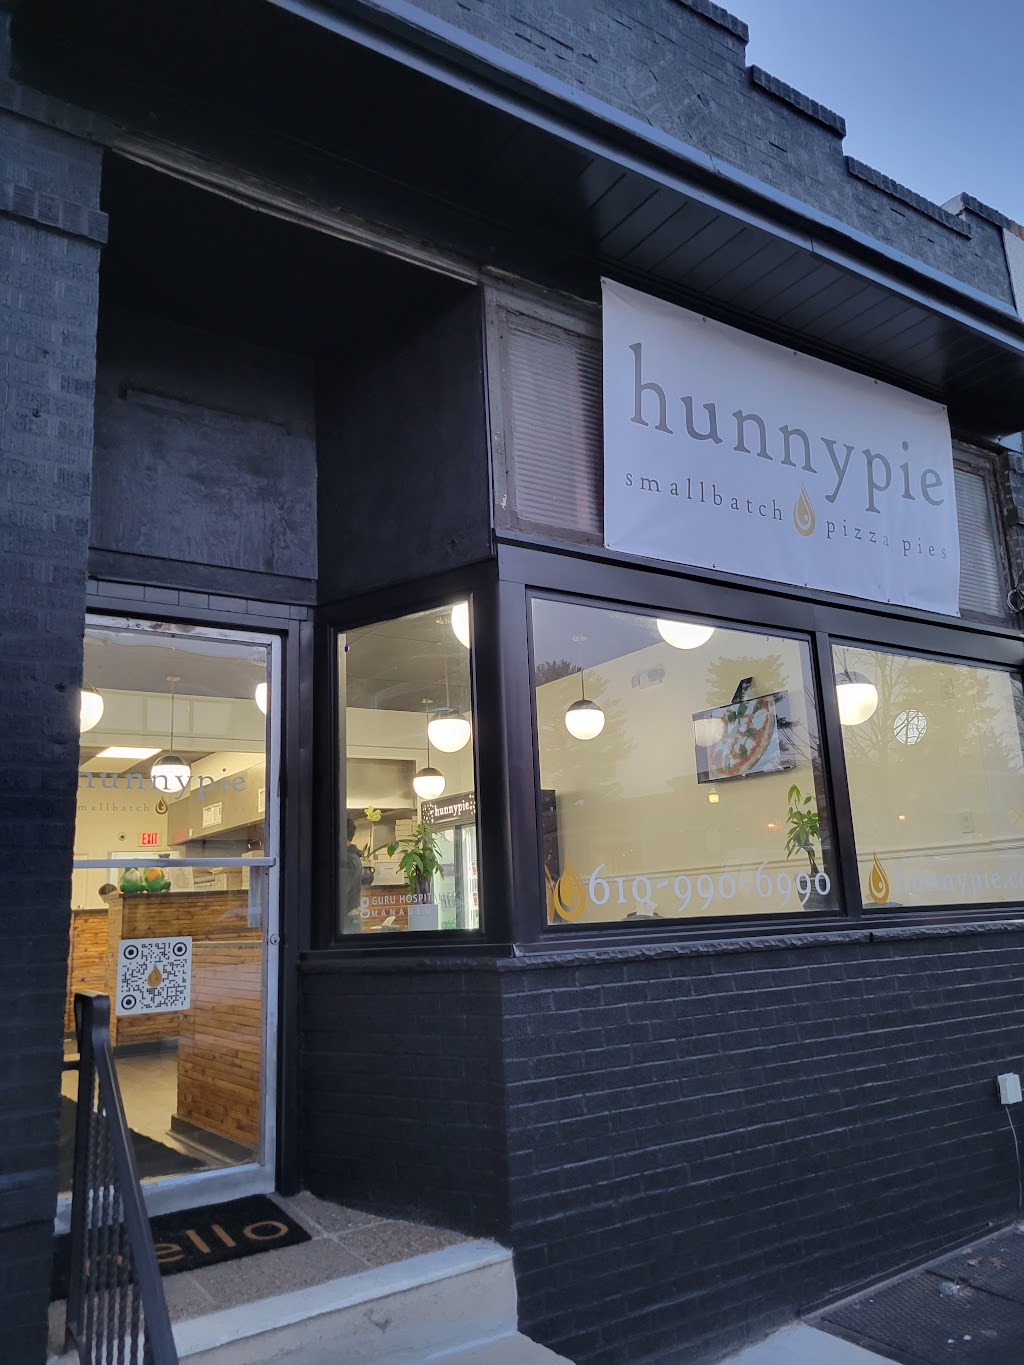 Hunnypie Smallbatch Pizza Pies | 156 Saxer Ave, Springfield, PA 19064 | Phone: (610) 990-6990